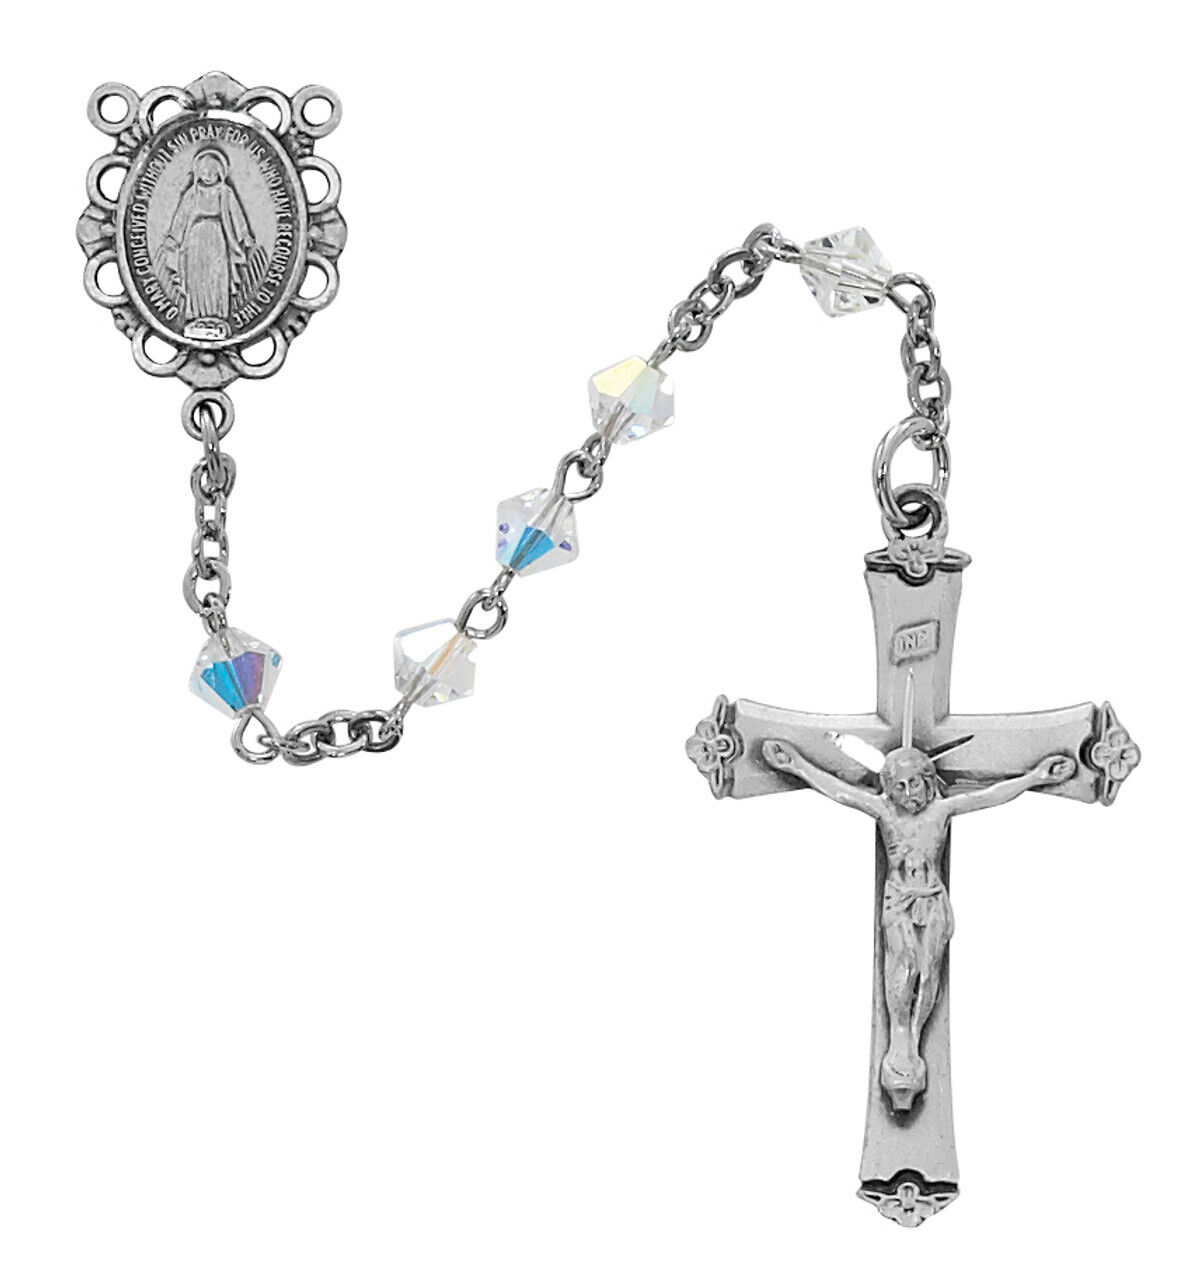 Swarovski Clear Crystal Rosary Beads Sterling Silver Crucifix And Center 5mm